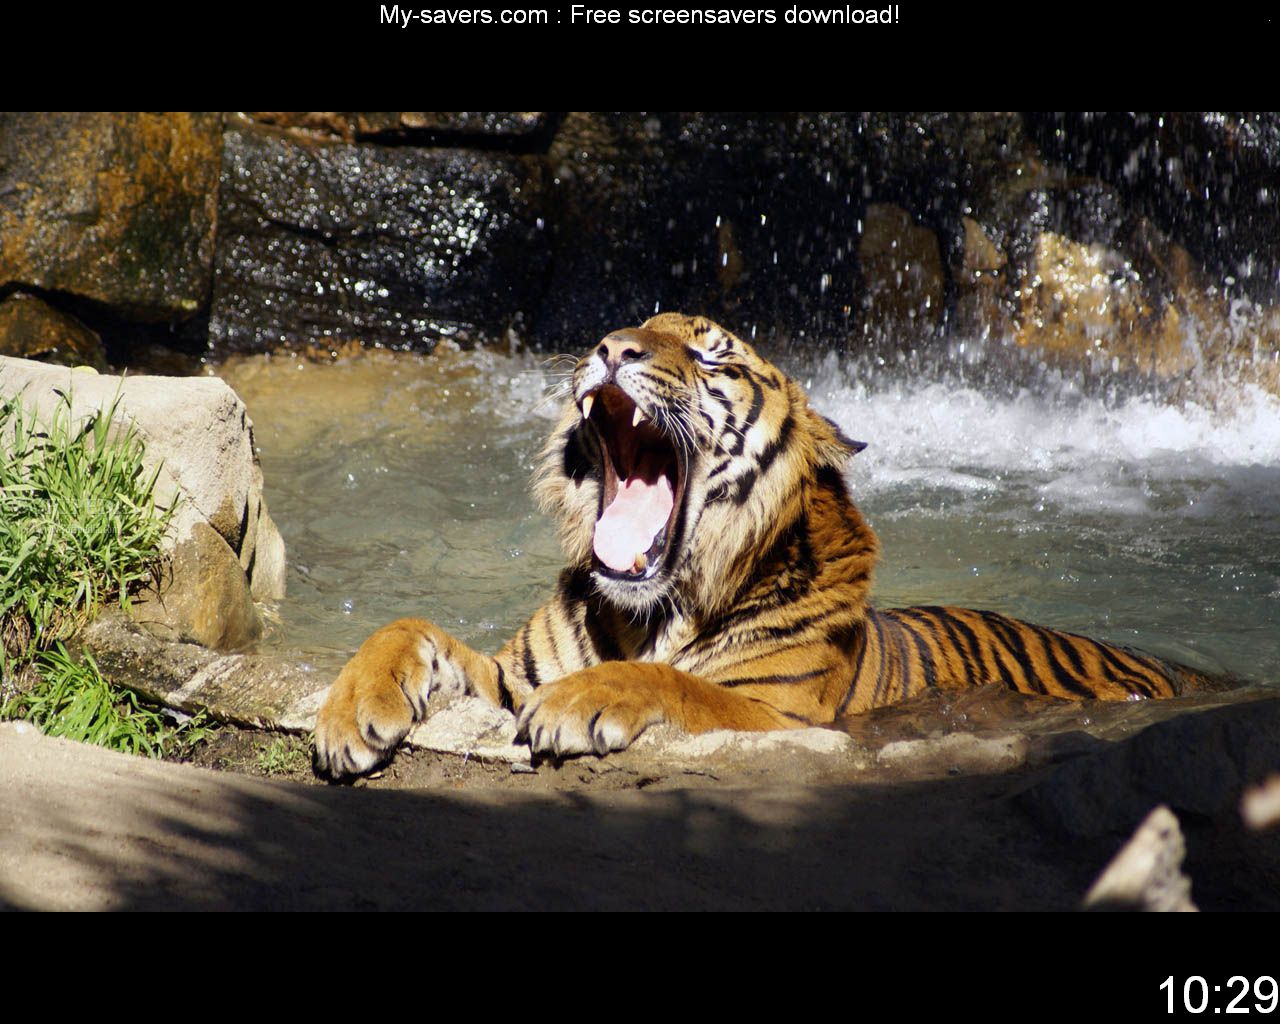 Free Tiger Pictures Screensaver screenshot 1   Tiger Pictures 1280x1024